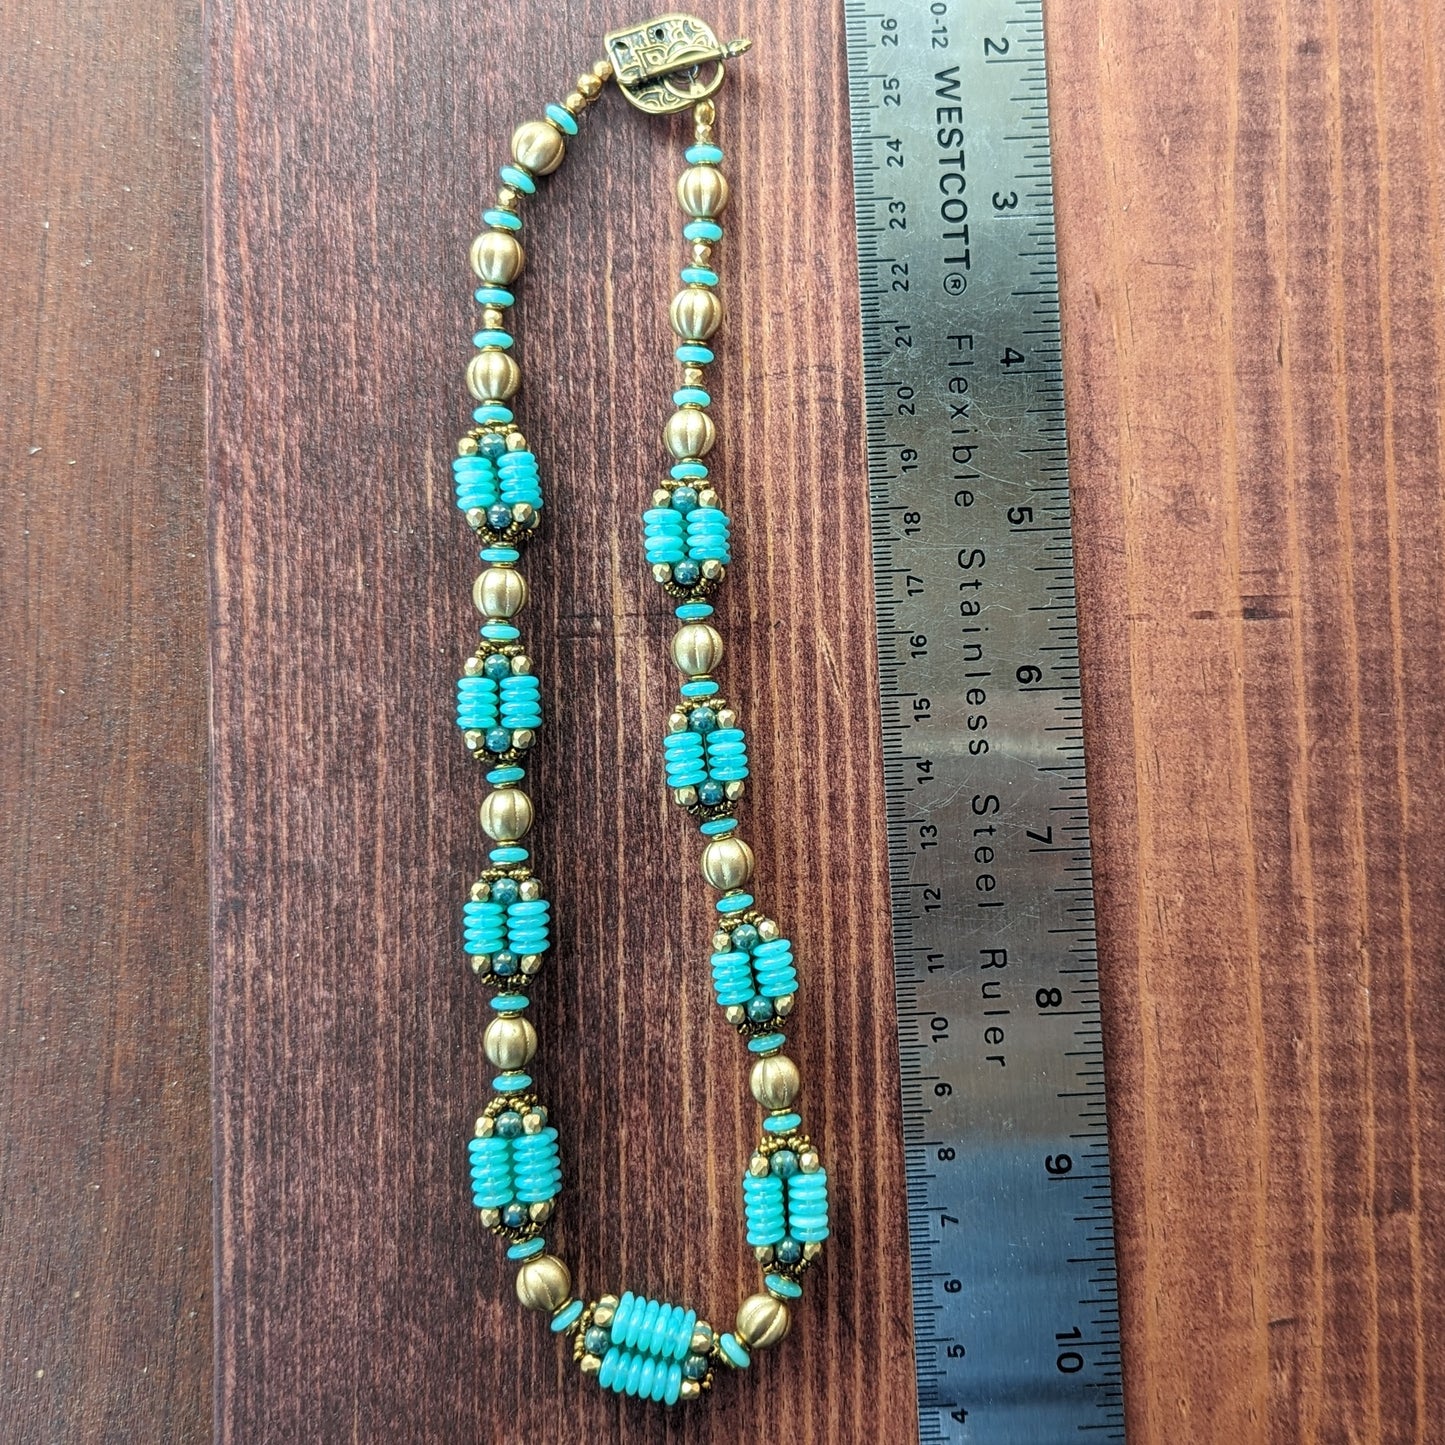 A light seafoam teal and gold necklace is laid out next to a ruler on a reddish wood board. The necklace has an alternating pattern of gold and seafoam beads, with nine handmade beaded beads with columns of light opalescent seafoam Czech glass discs with lustered teal accents. The necklace has a delicately patterned teardrop shaped brass toggle clasp.